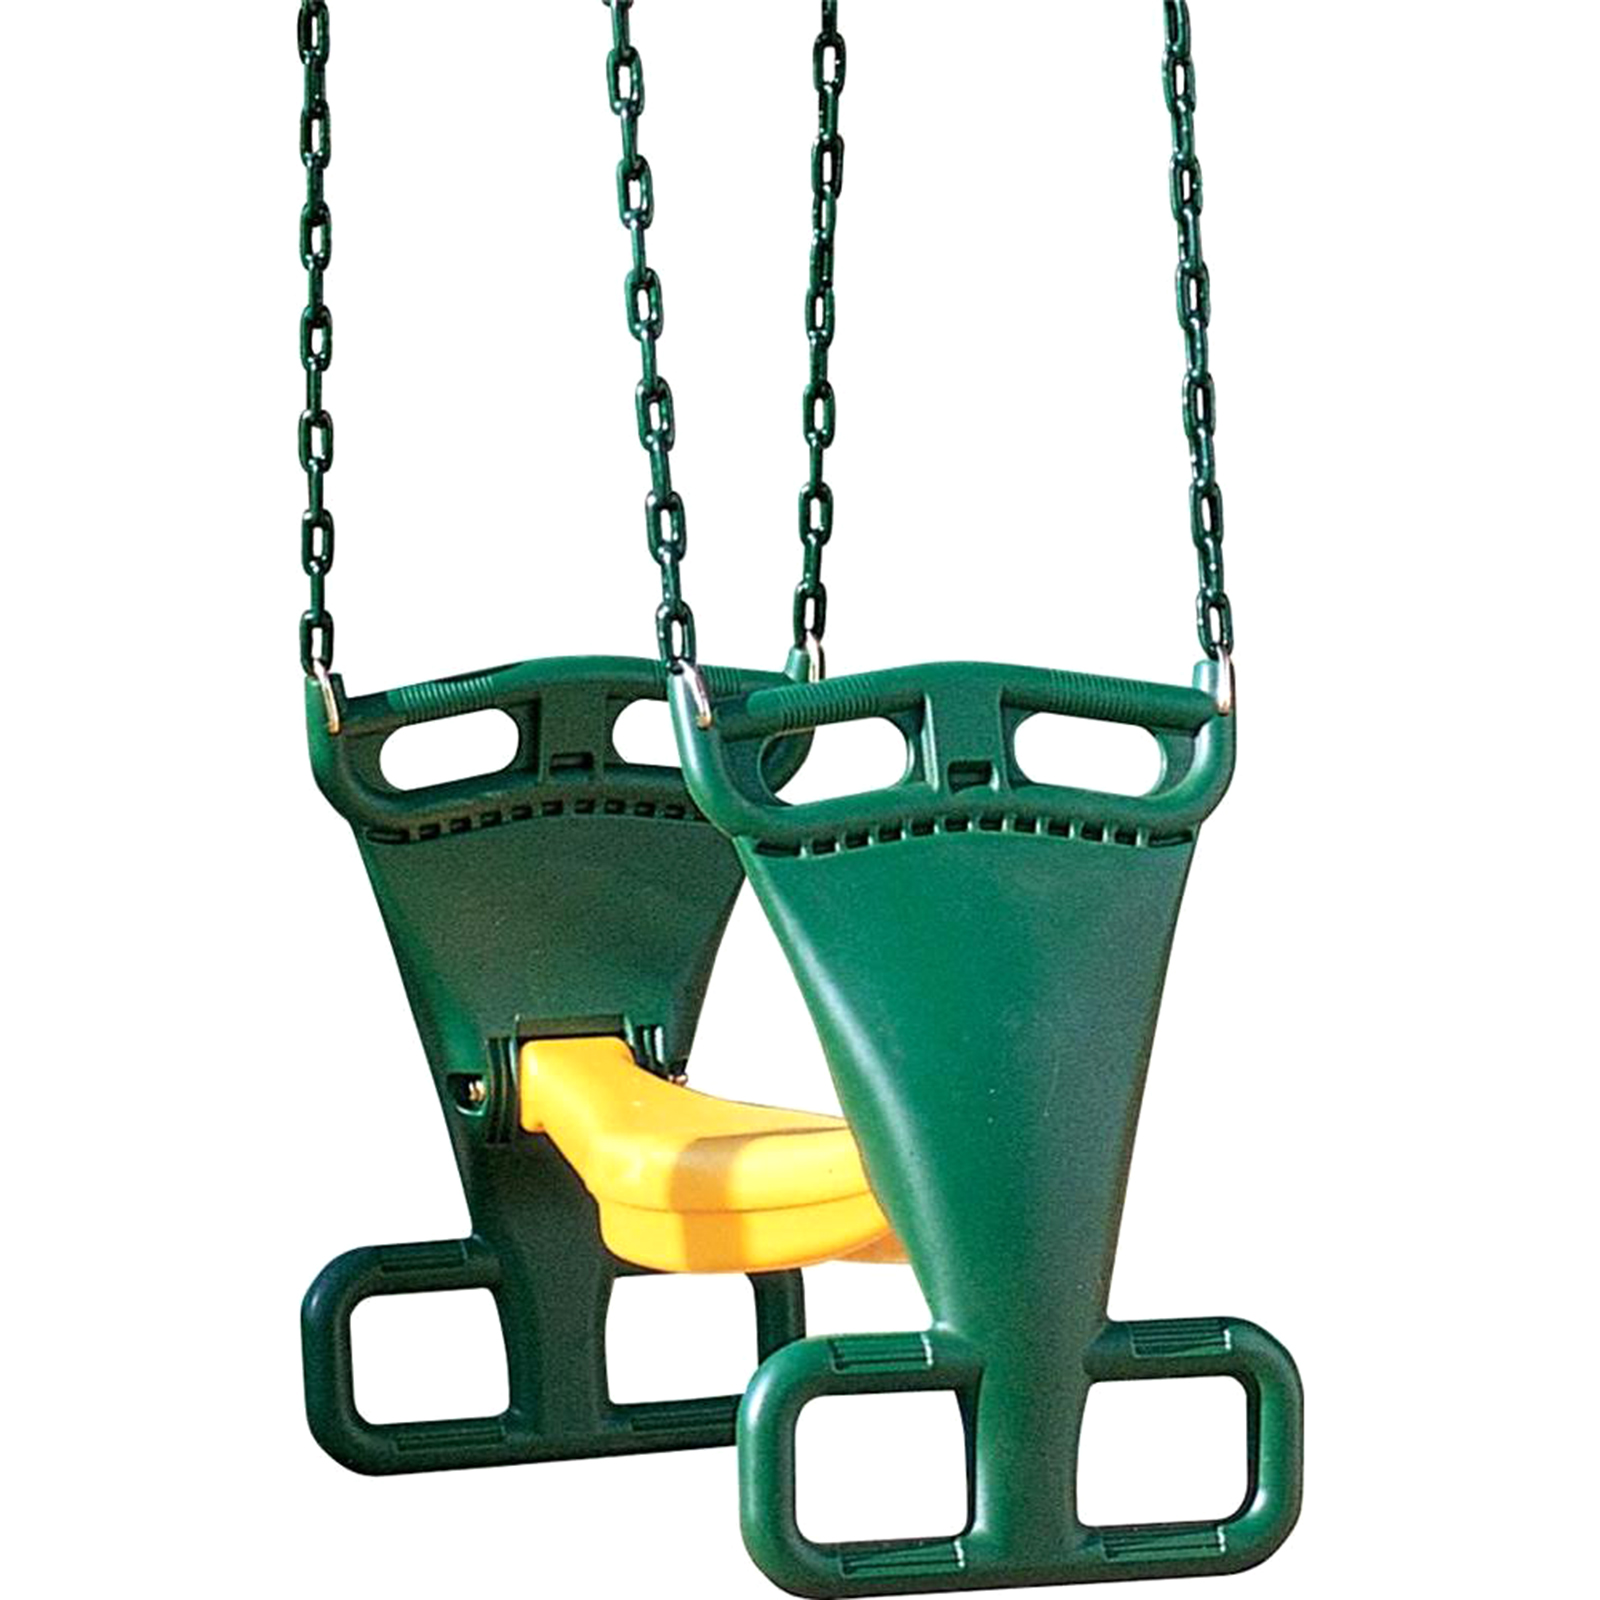 Creative Playthings LTD. Back to Back Glider with Chain